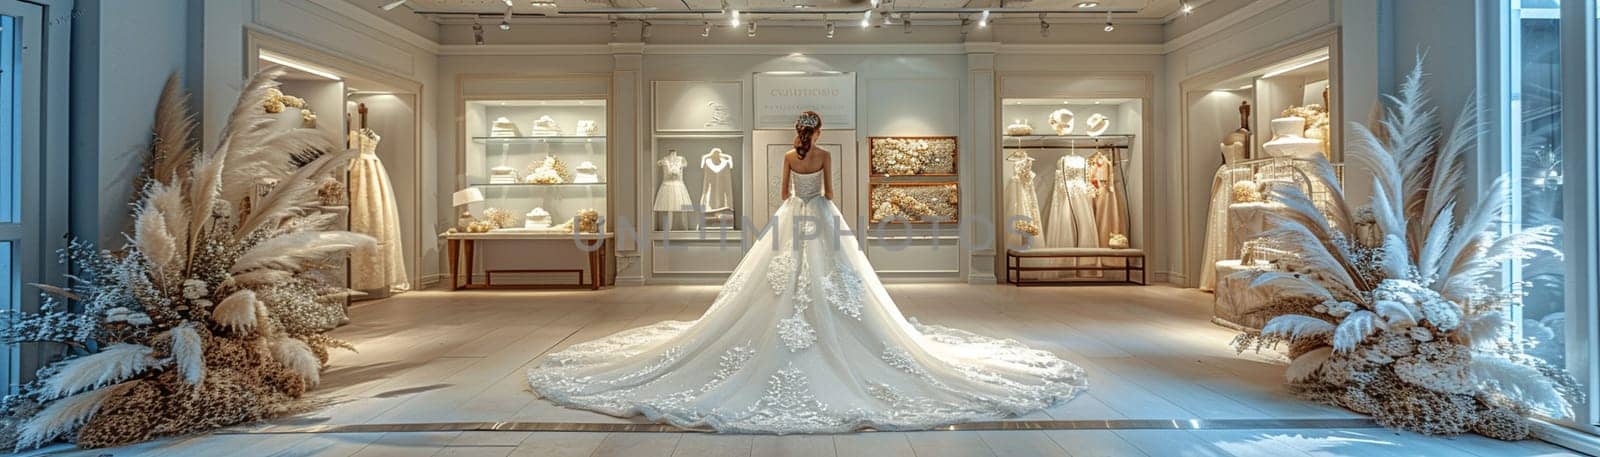 Elegant Bridal Boutique with Soft Focus on Gowns and Accessories, The hazy outlines of wedding attire suggest dreams and preparations for a special day.